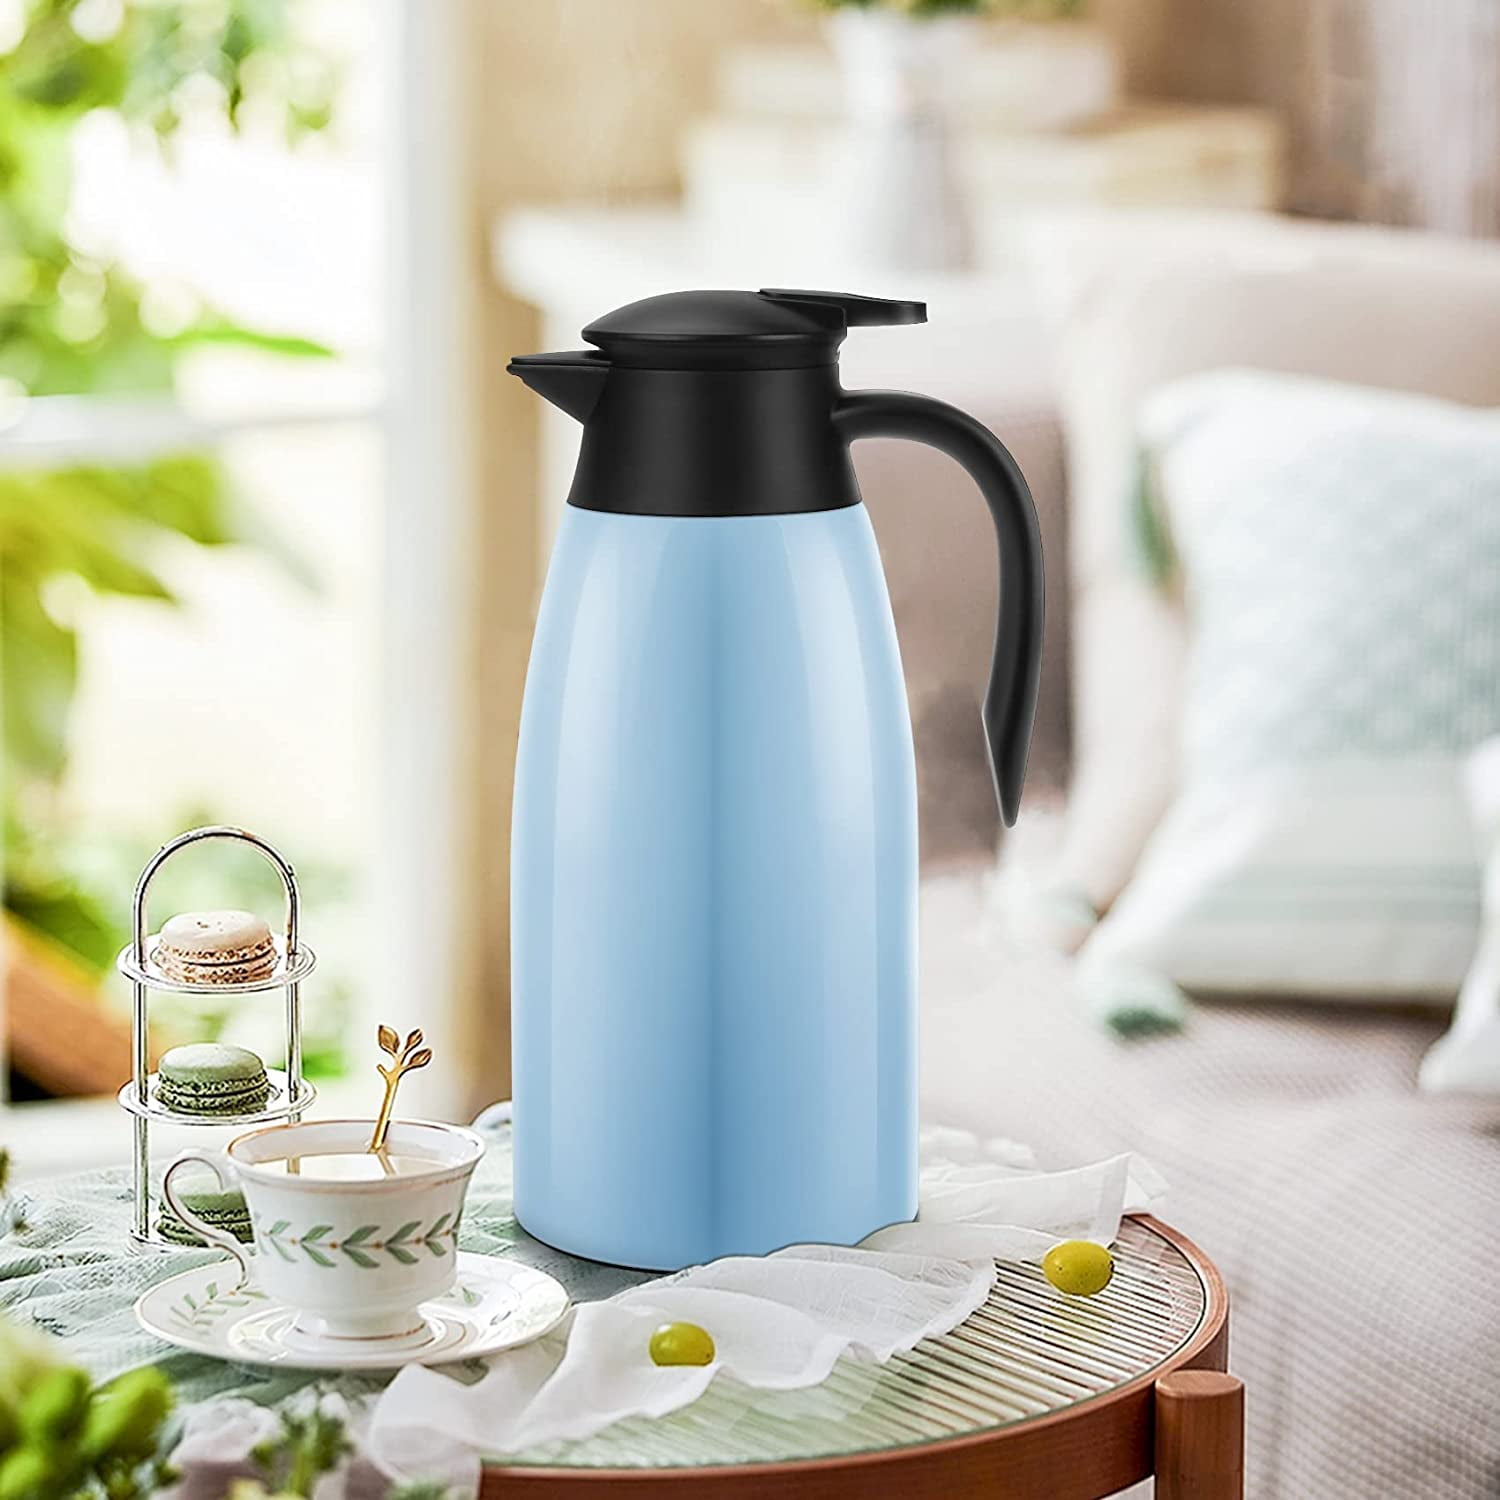 68 Oz 316L Stainless Steel Thermal Carafe Light Thermos Insulated Coffee  Carafe Vacuum Flask Tea Pot Hot Water Pitcher Thickened Curved Handle Hot 